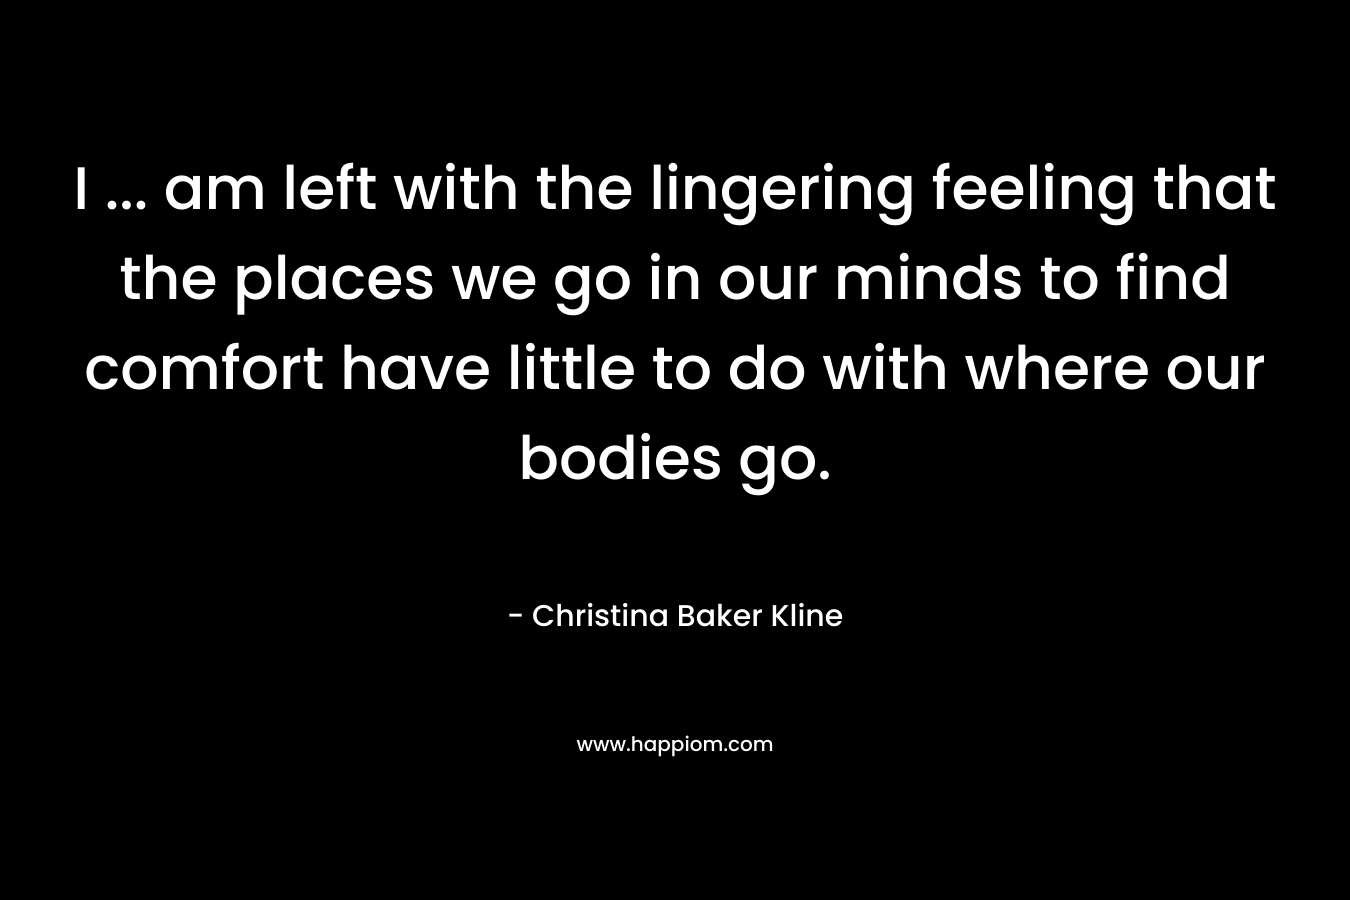 I … am left with the lingering feeling that the places we go in our minds to find comfort have little to do with where our bodies go. – Christina Baker Kline